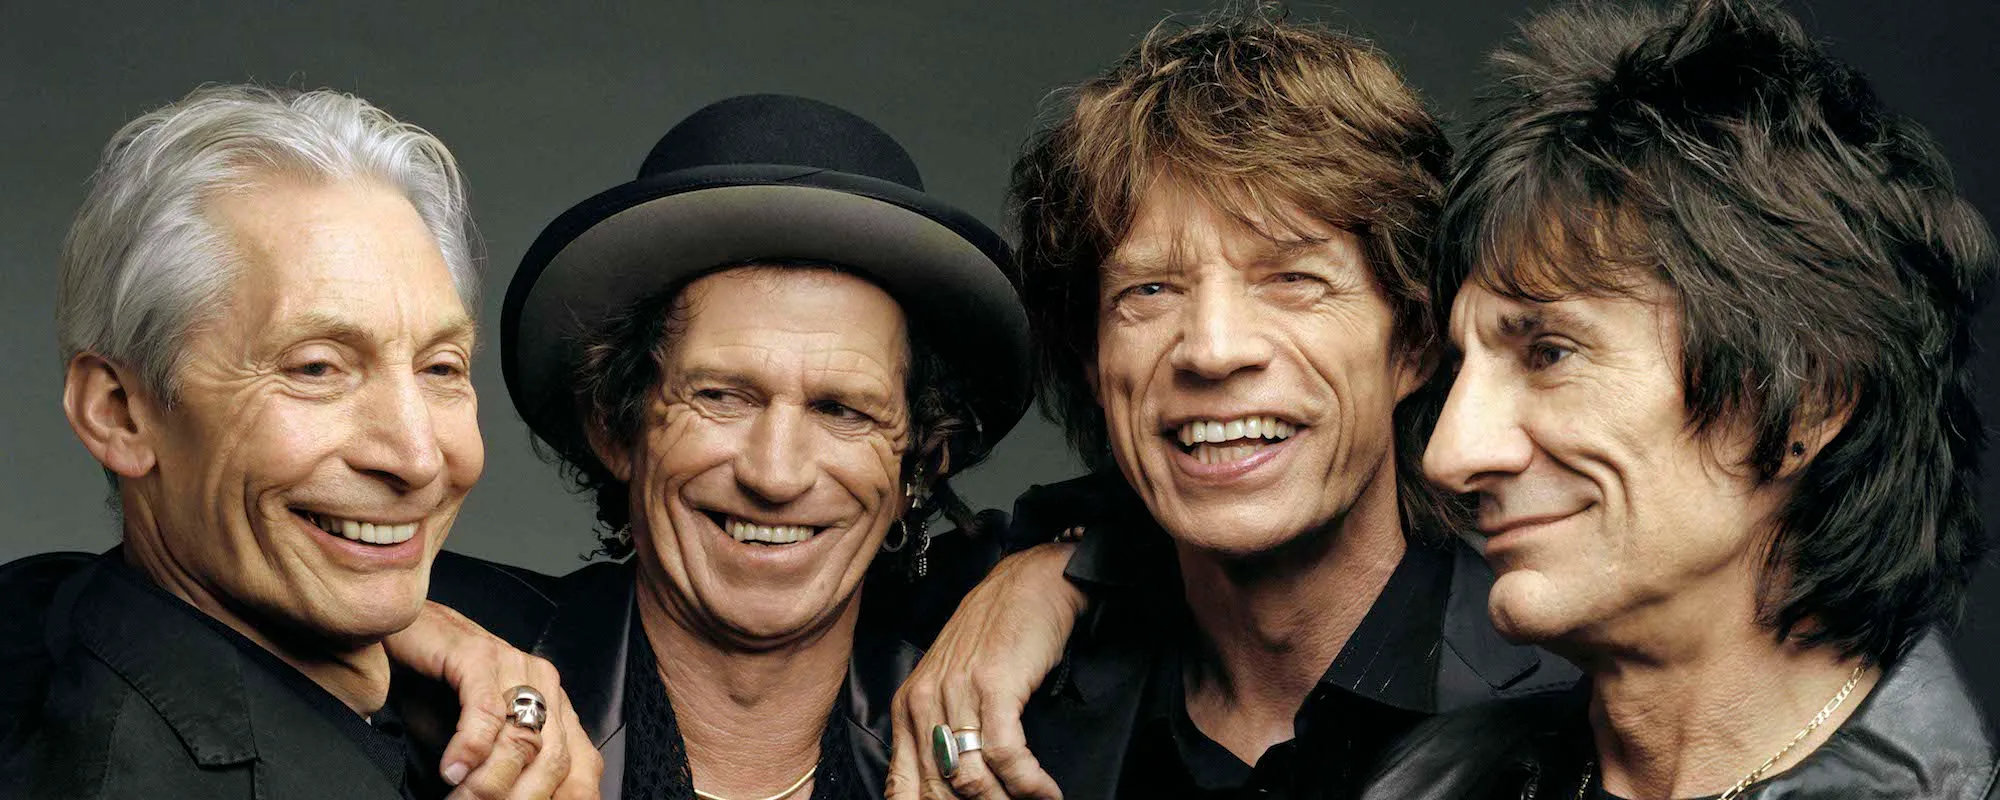 15 Things We Learned from Episode 1 of the New Rolling Stones Doc ‘My Life as a Rolling Stone’